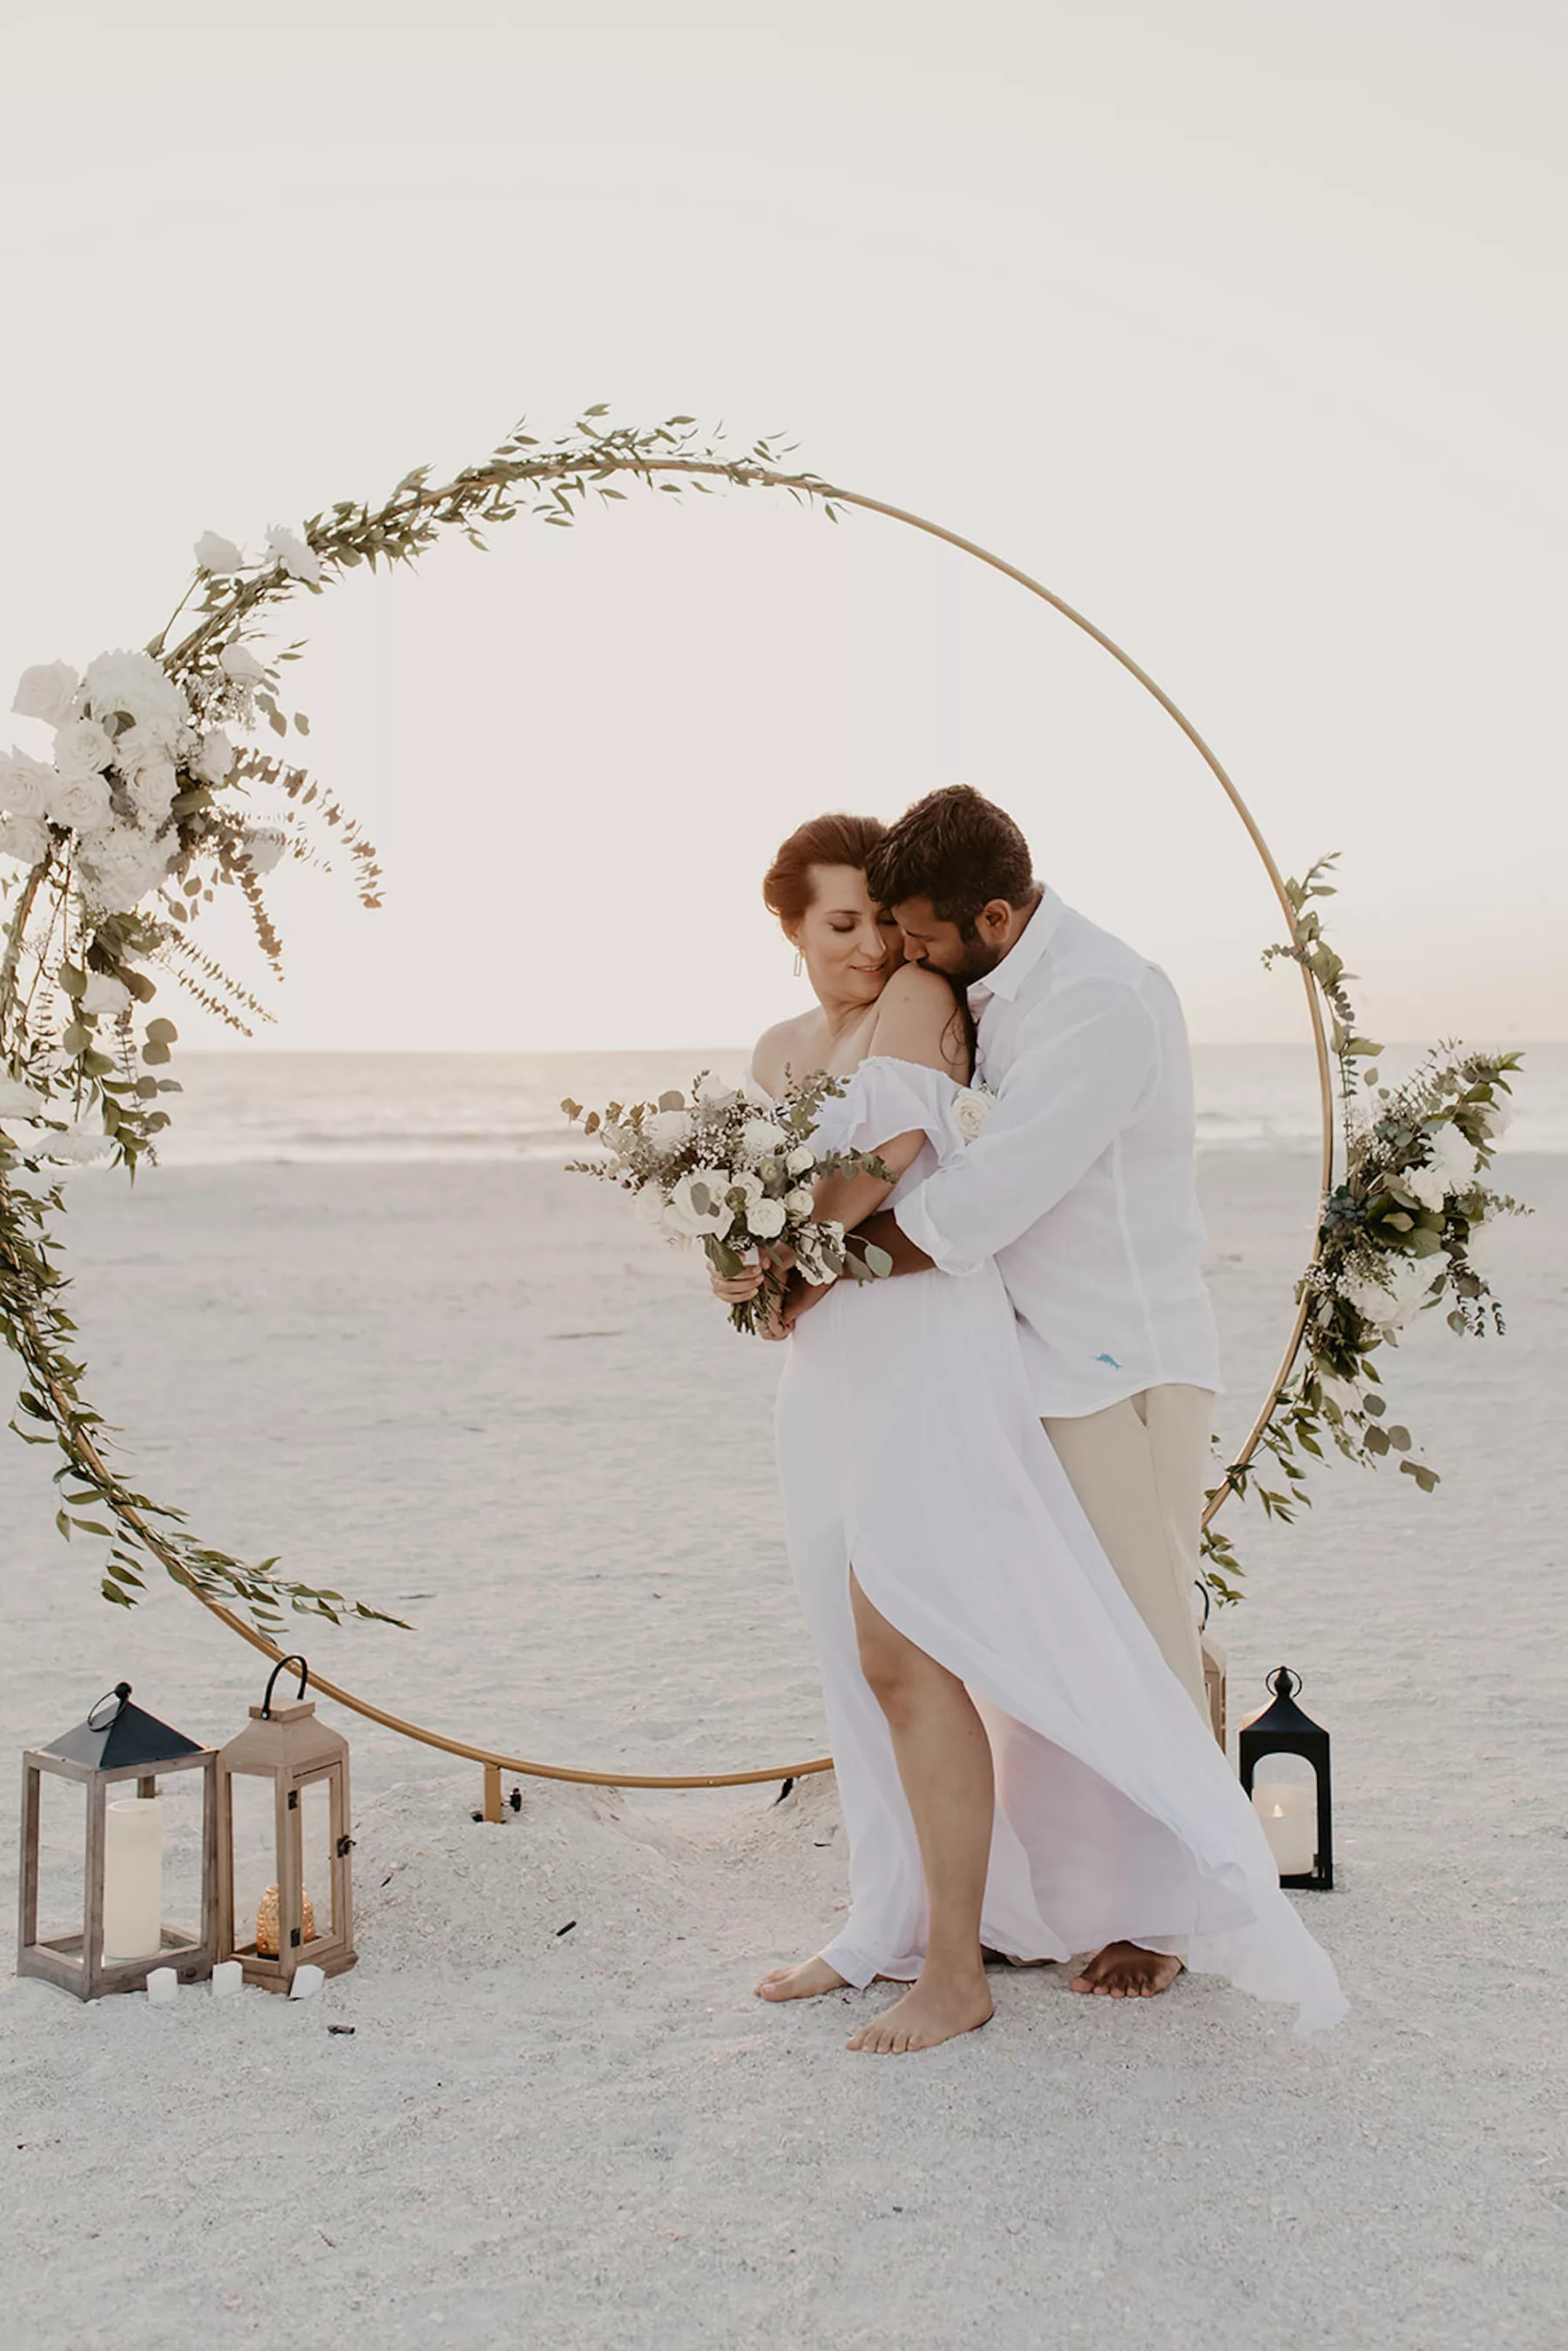 Intimate Boho Beach Wedding Ceremony Elopement Decor Ideas | Round Gold Arch with White Roses, Baby's Breath, Greenery, and Lanterns | Tampa Bay Florist Lemon Drops